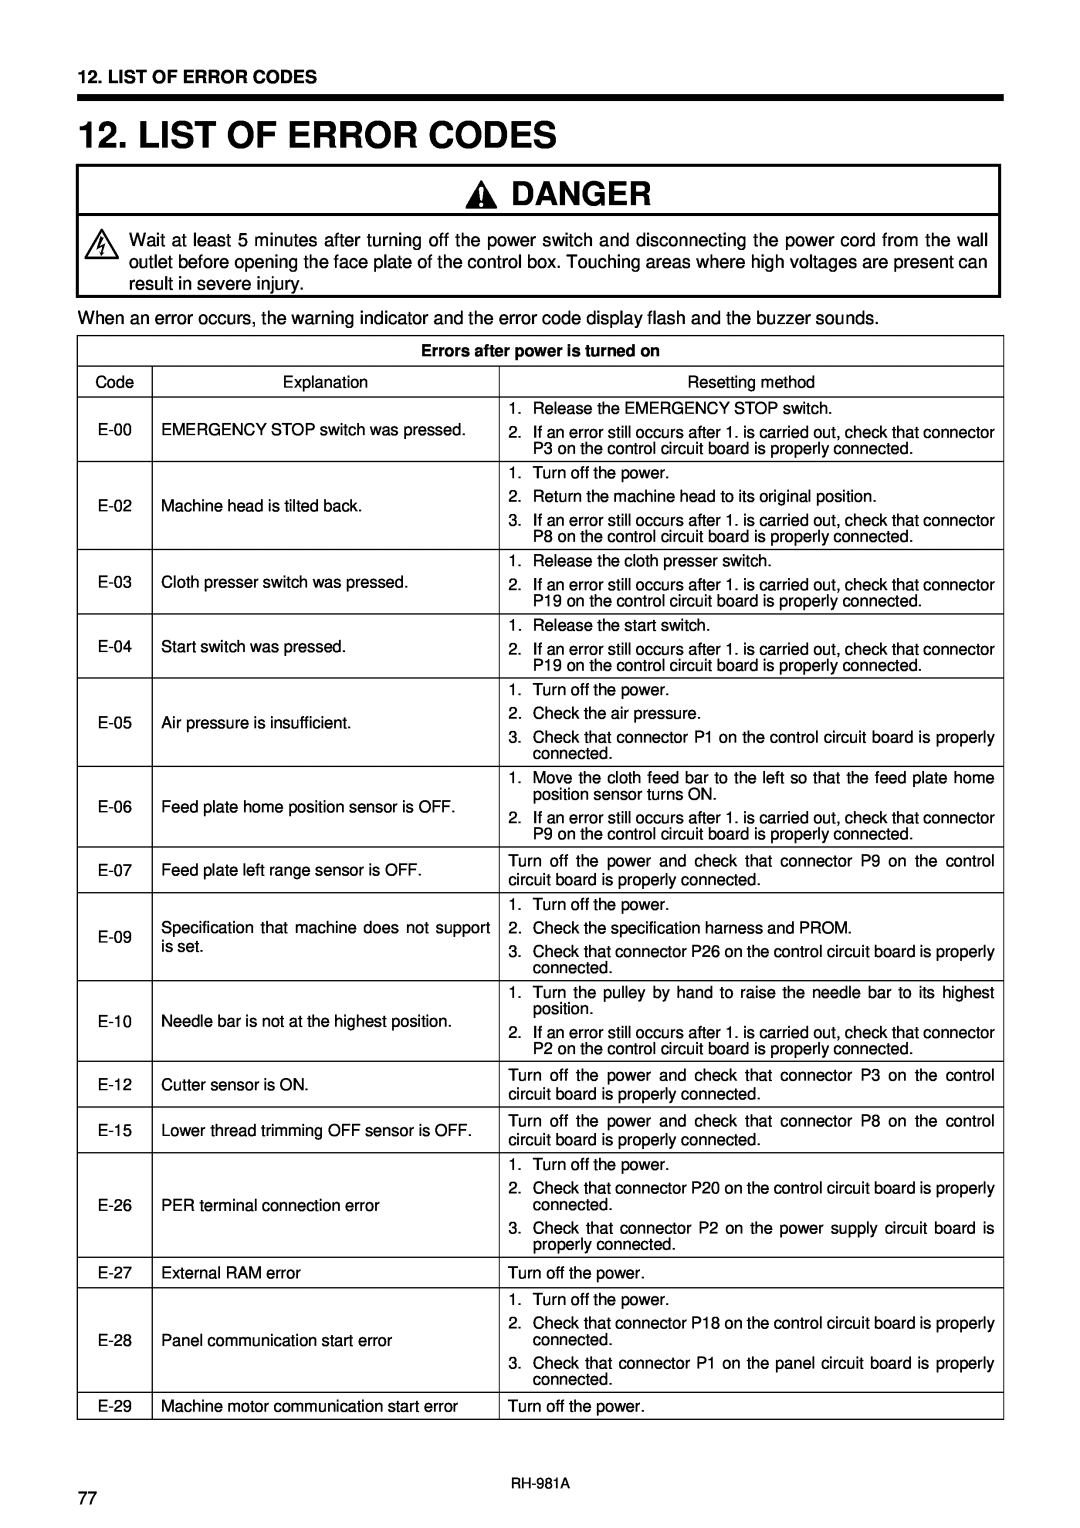 Brother rh-918a manual List Of Error Codes, Danger 